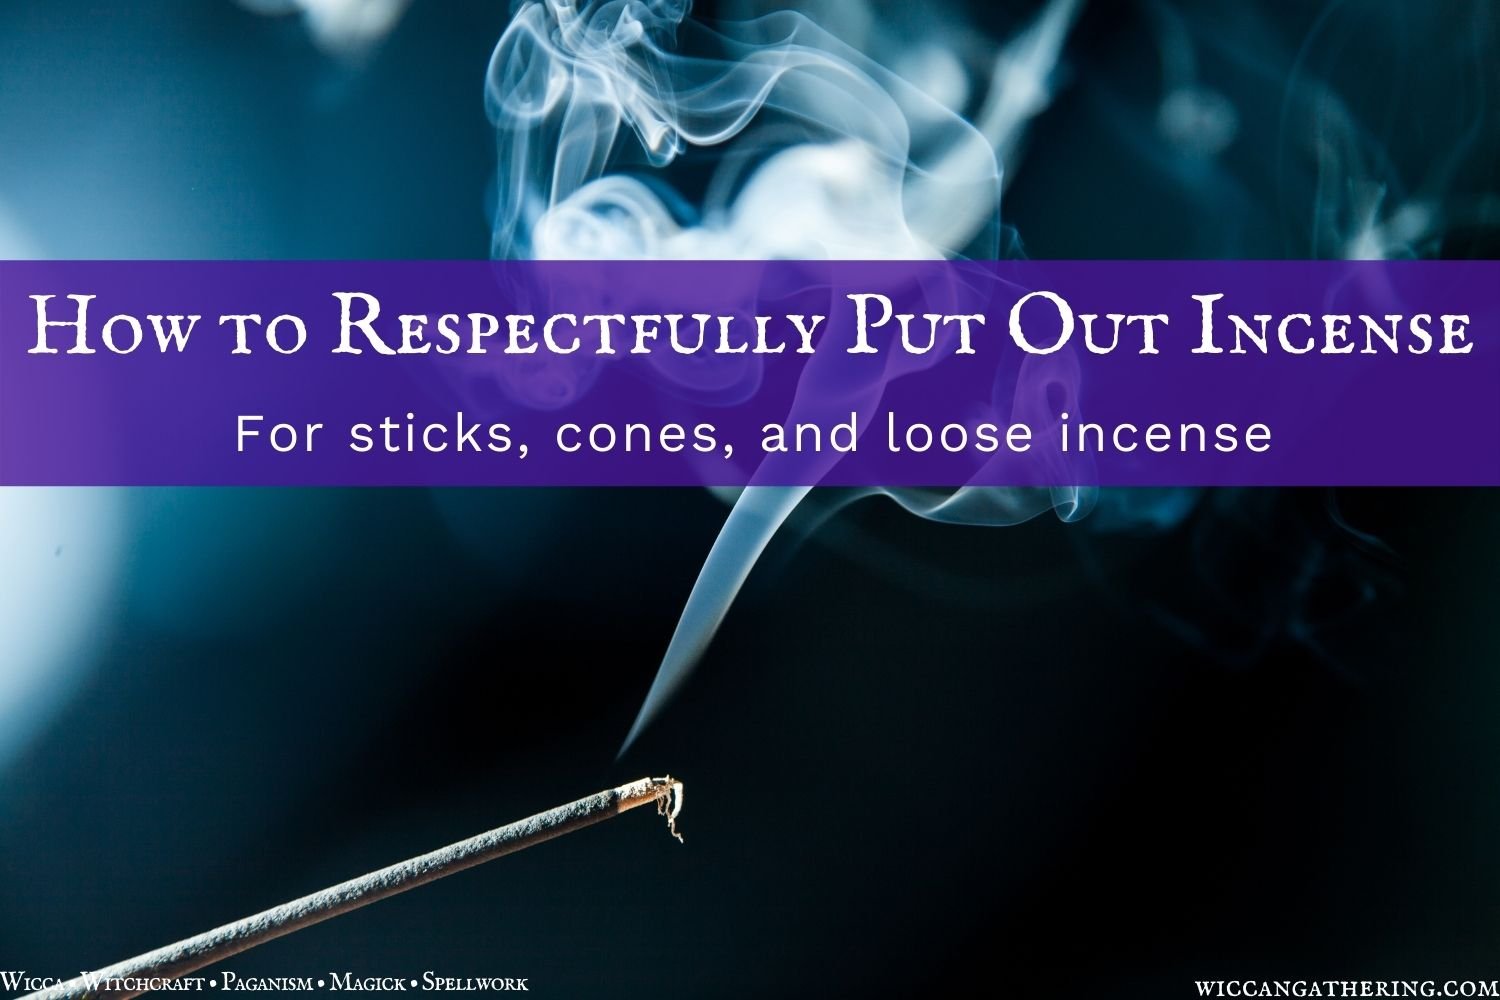 how to respectfully put out incense for wicca